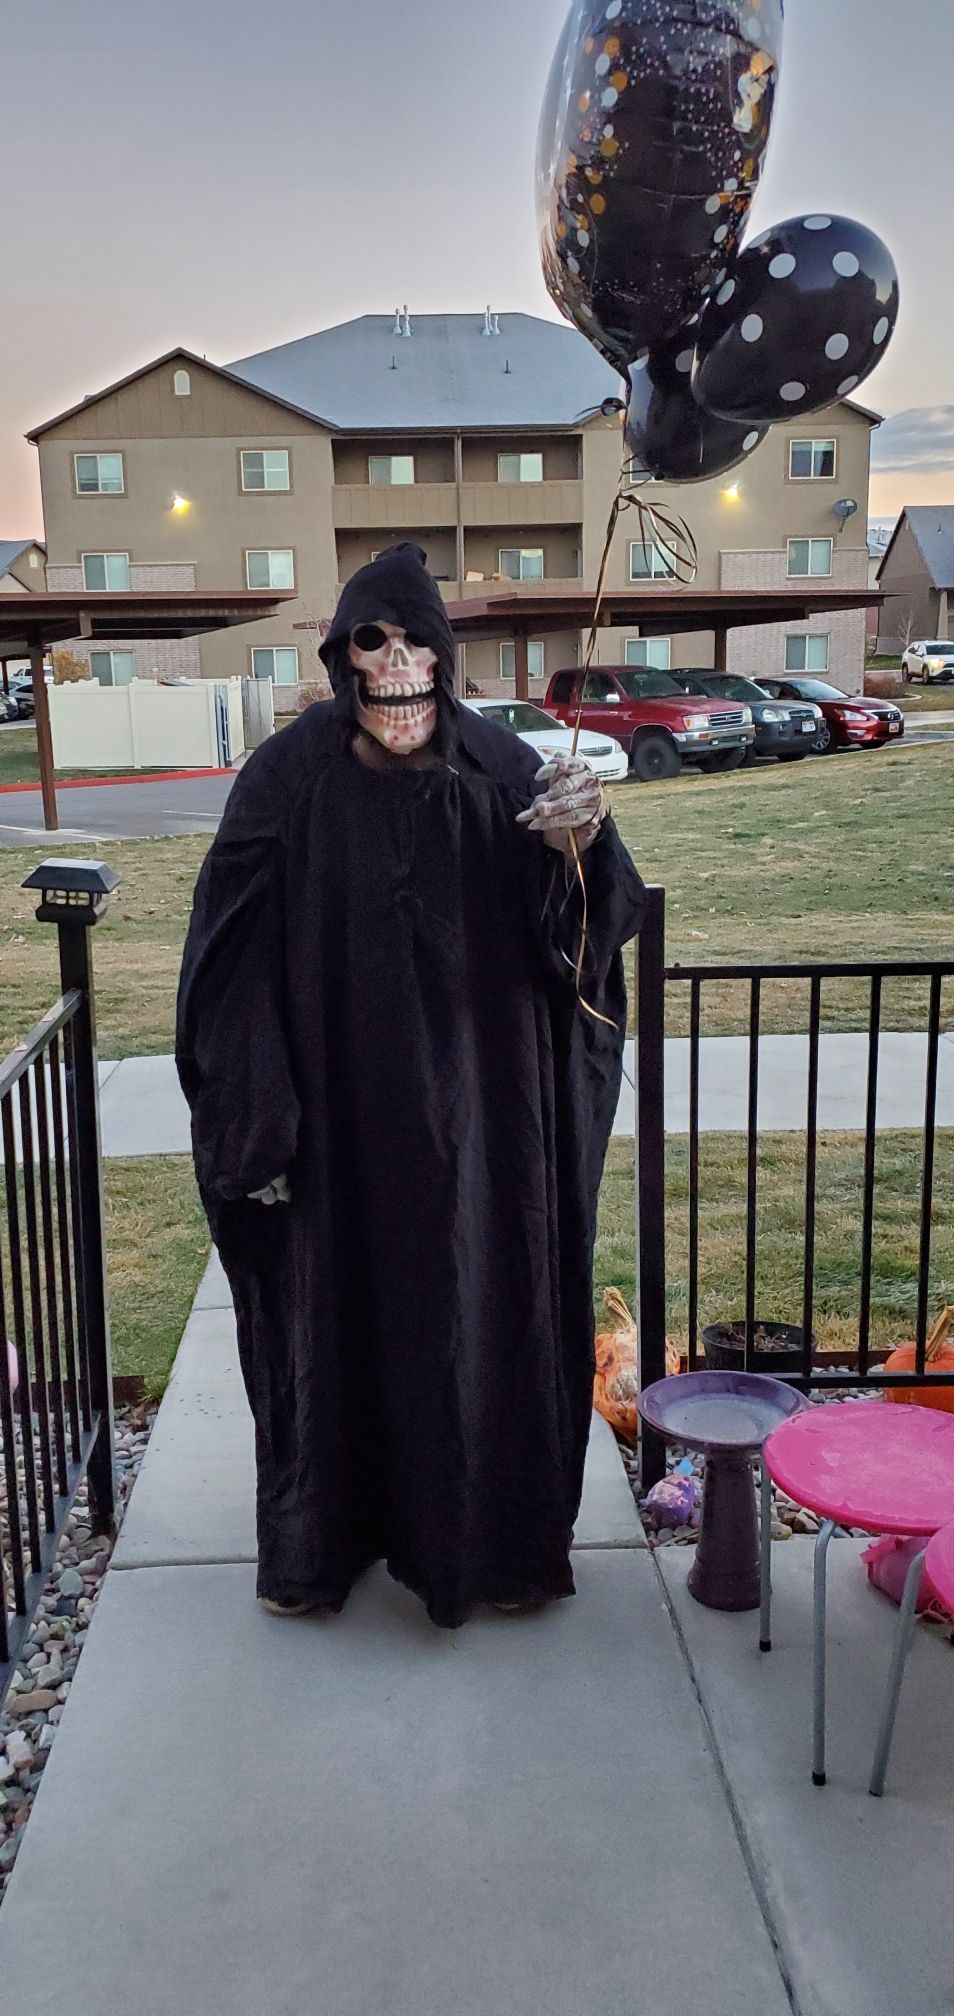 My friend turned 40 today, so I delivered balloons this morning dressed as the grim reaper.